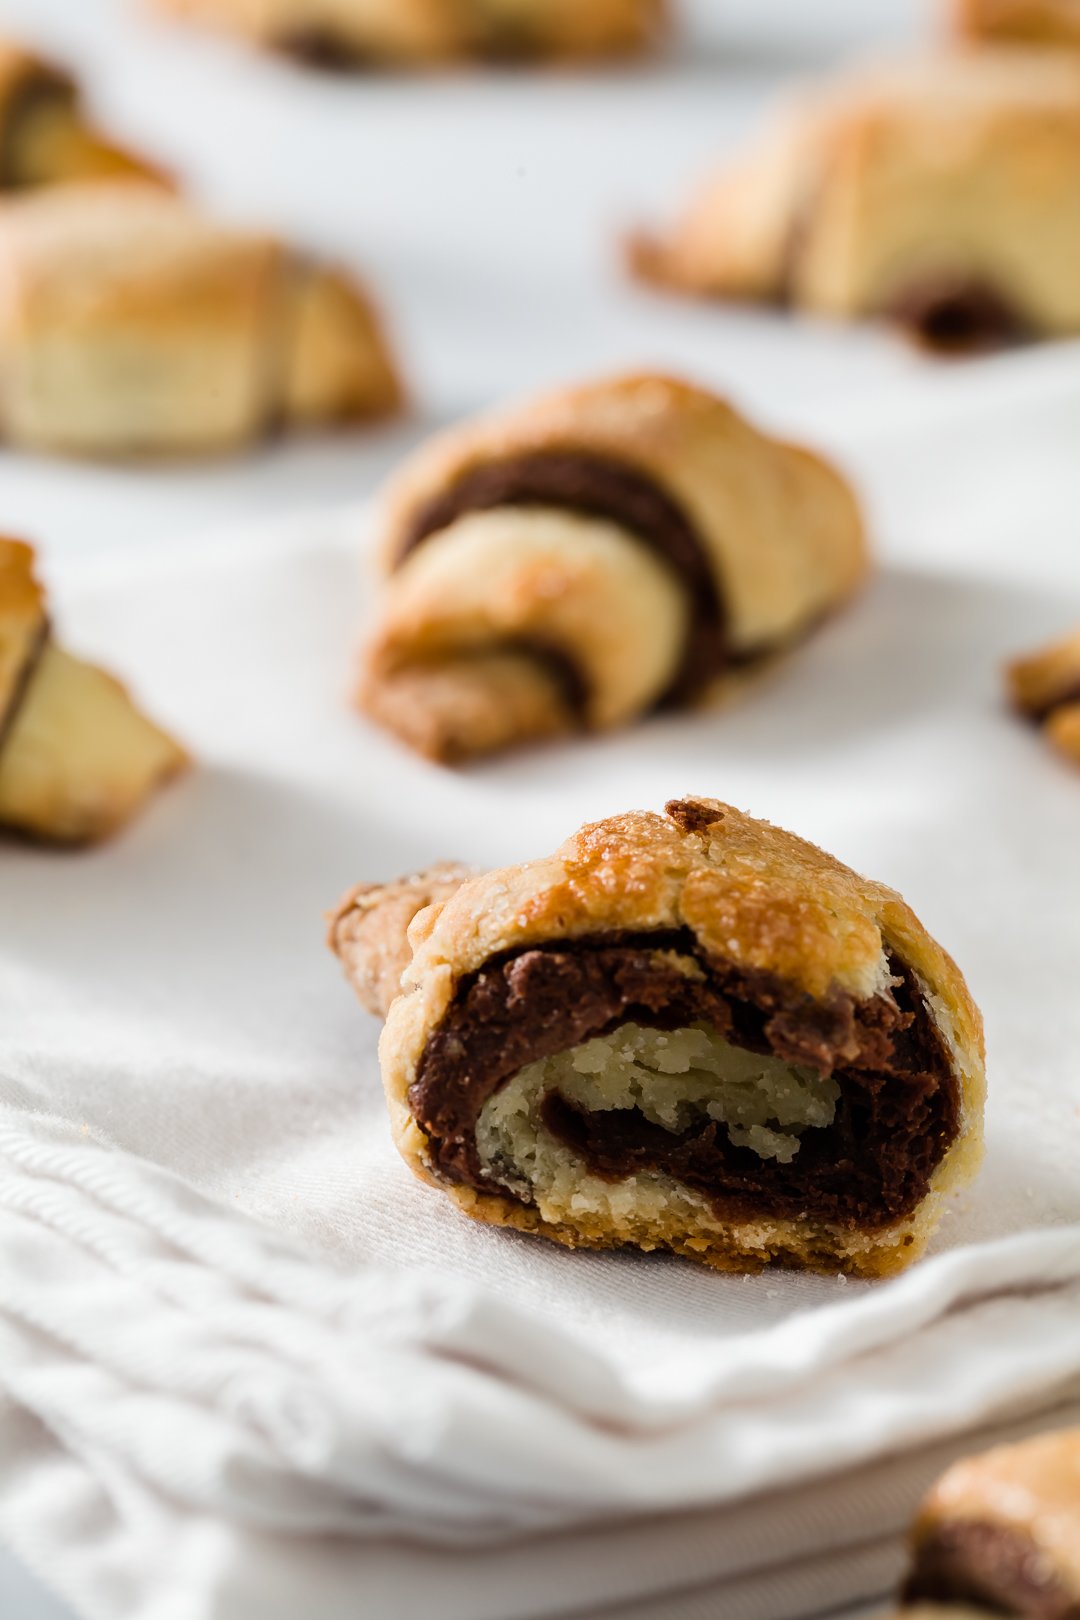 Chocolate Rugelach Rugelach Recipe With Step By Step Instructions